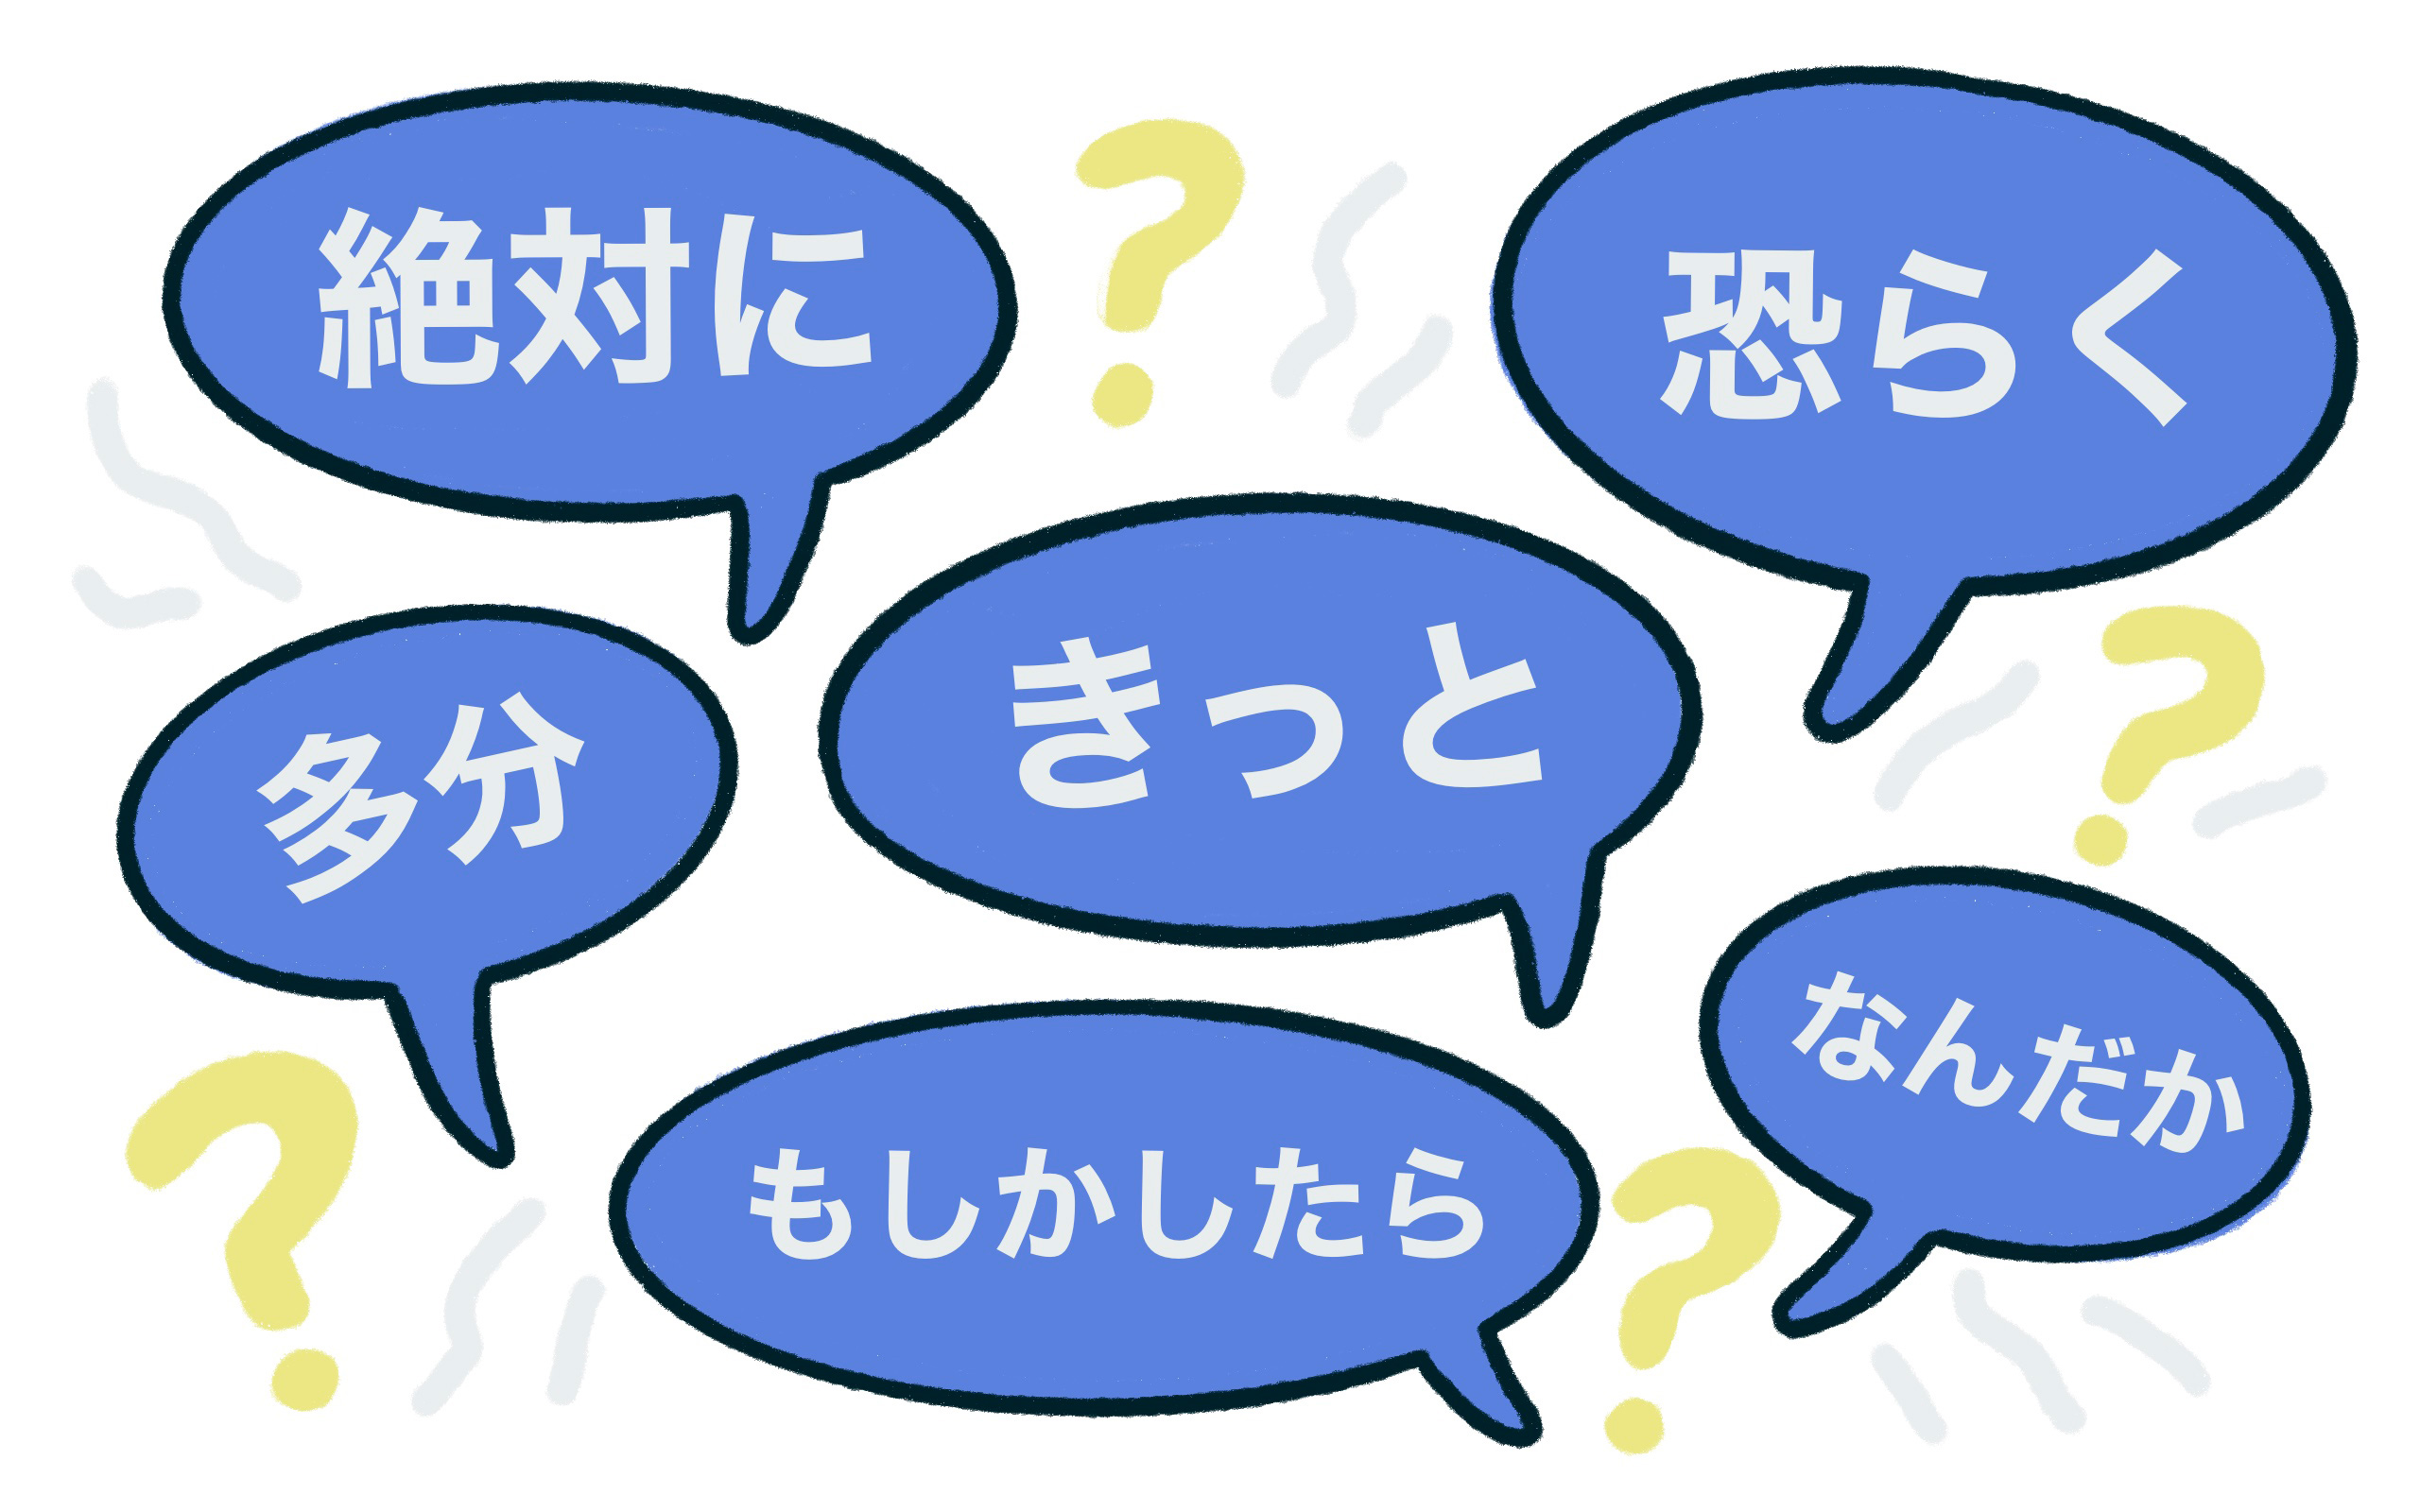 text bubbles with different Japanese adverbs that express uncertainty